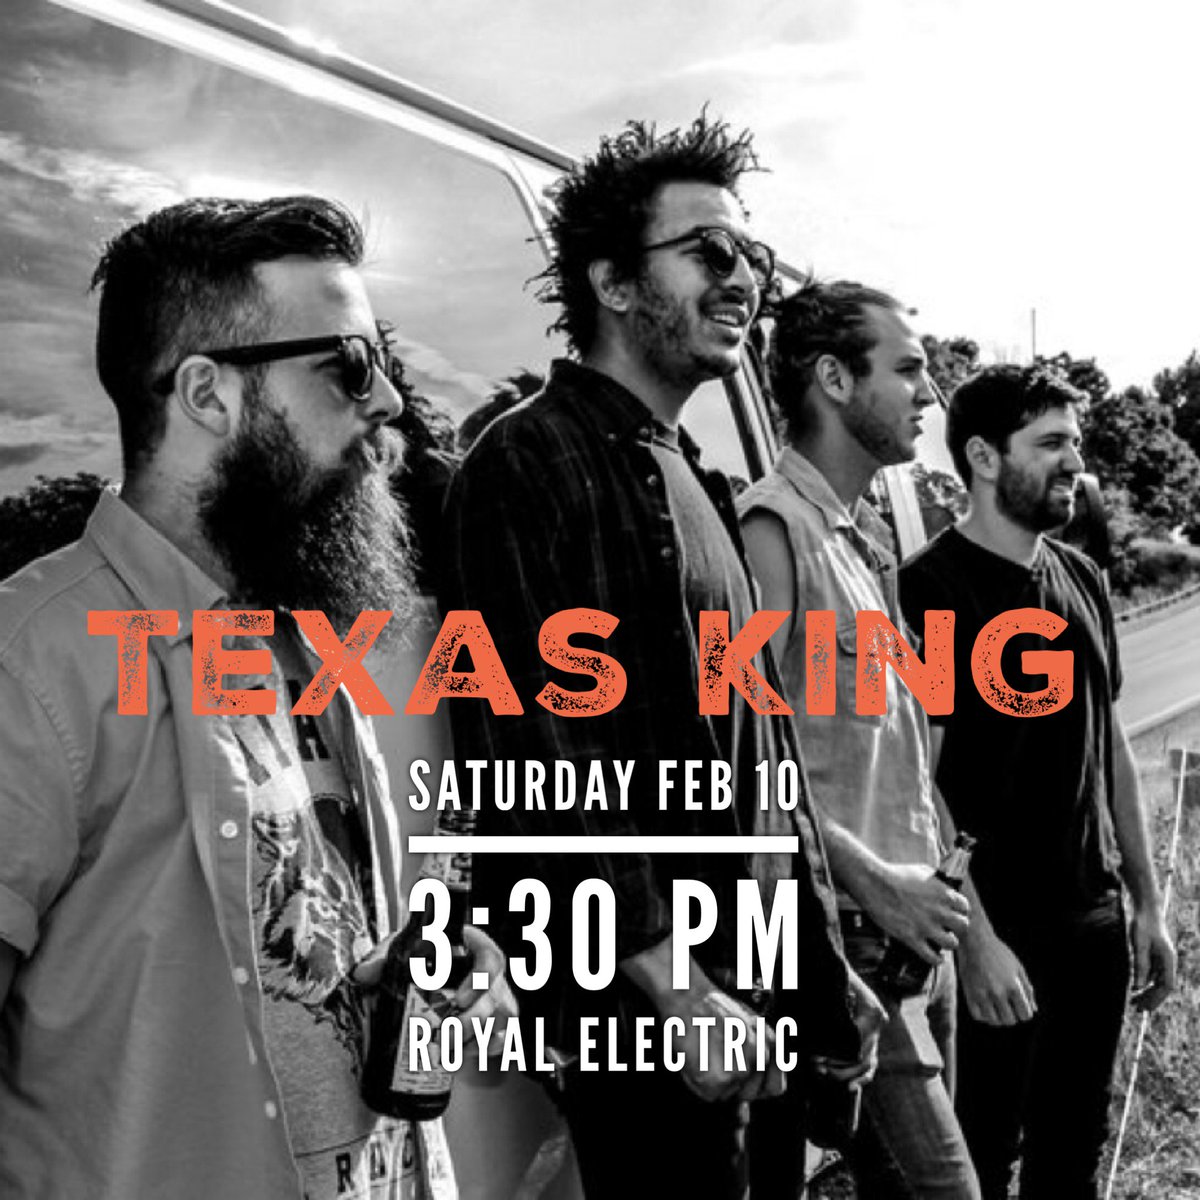 Texas King rounds out our rock trio concert! Catch three awesome bands for one PWYC price! ($10 suggested). Show starts 3:30 on Saturday. #music #rocknroll #guelph #thingstodo #texasking #ontario #royalelectric #happyhillside #hillsideinside #pwyc